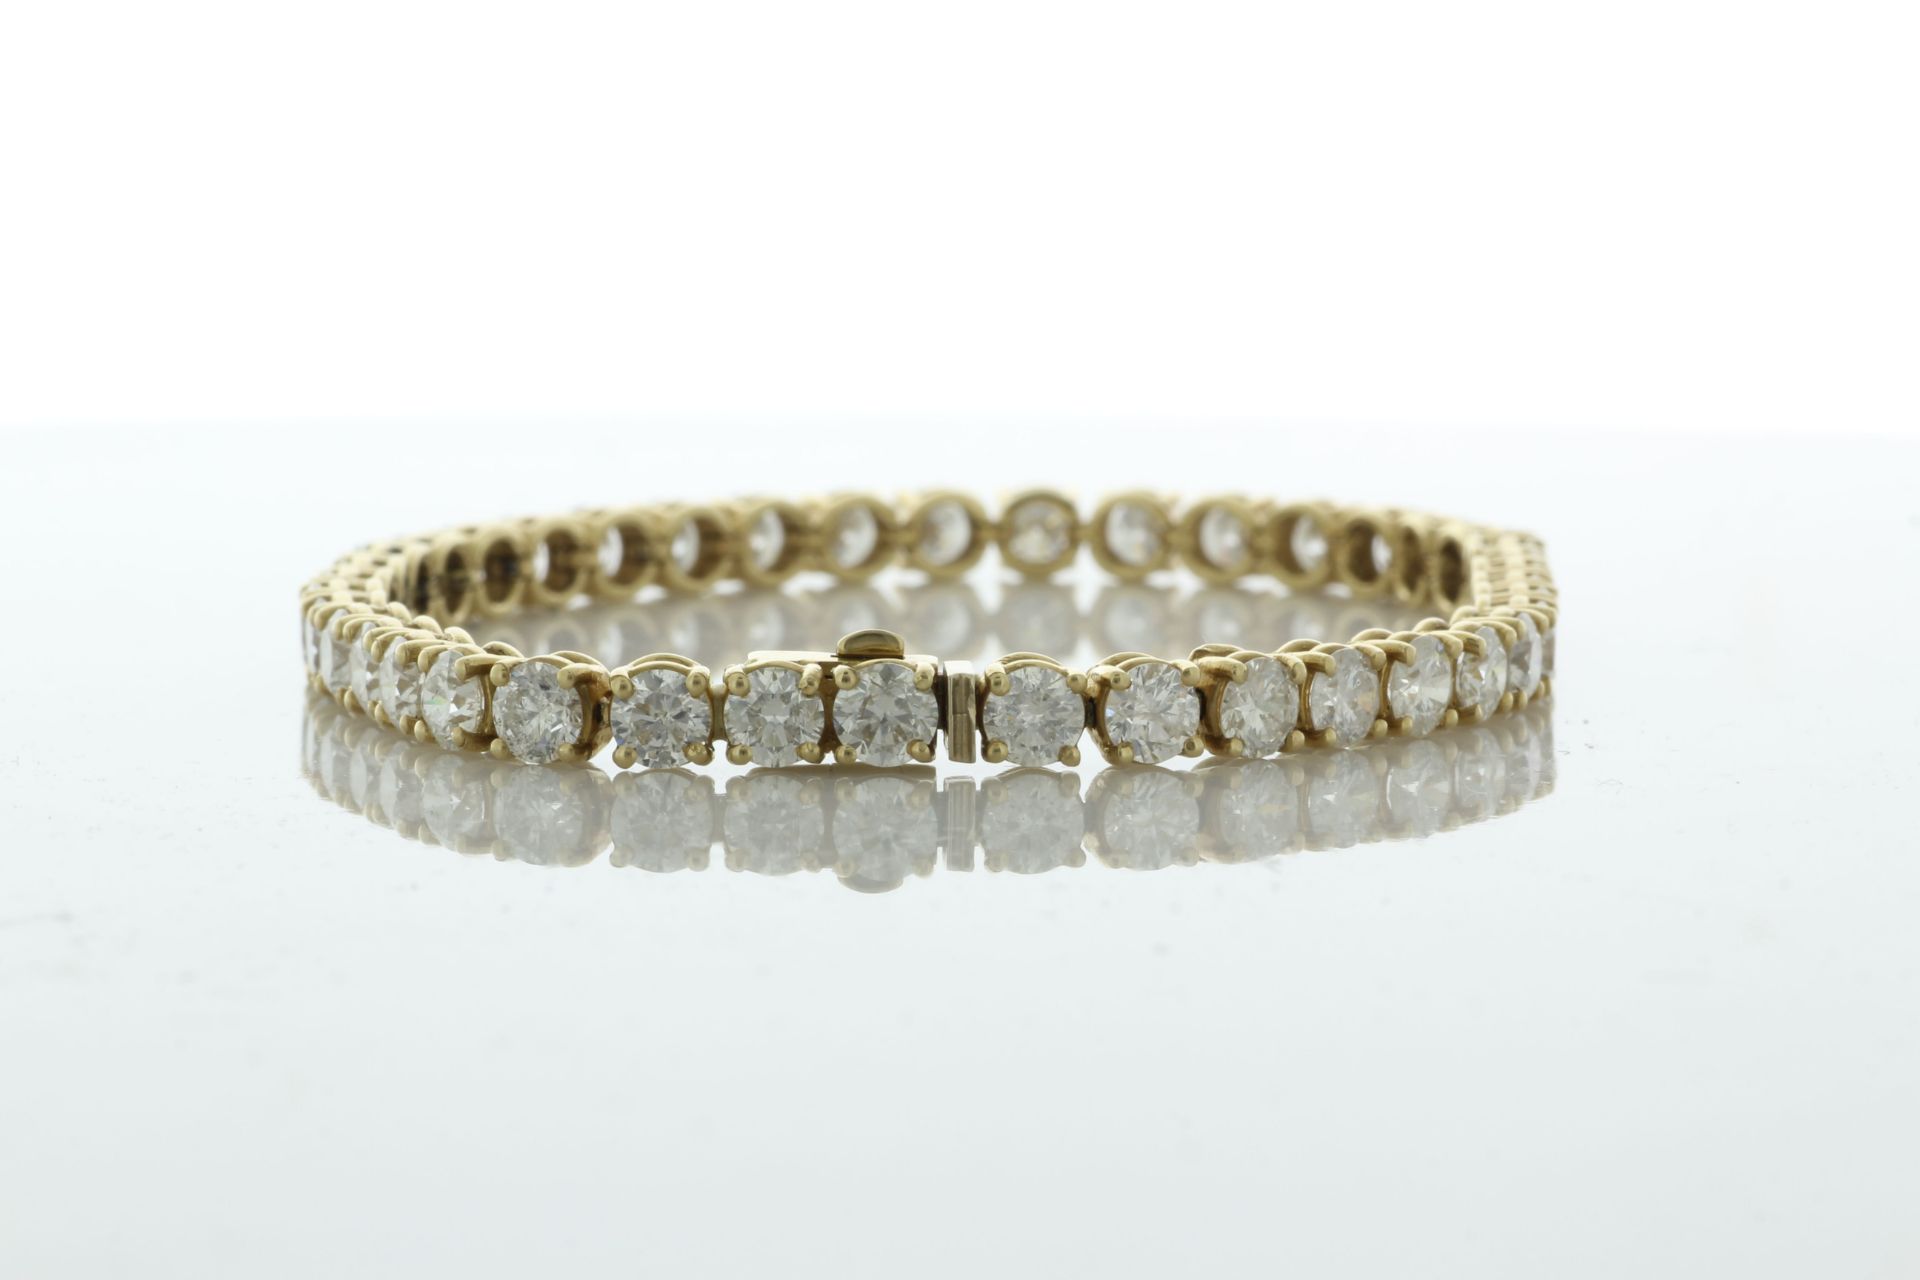 18ct Yellow Gold Tennis Diamond Bracelet 10.15 Carats - Valued By IDI £52,605.00 - Forty one - Image 3 of 5